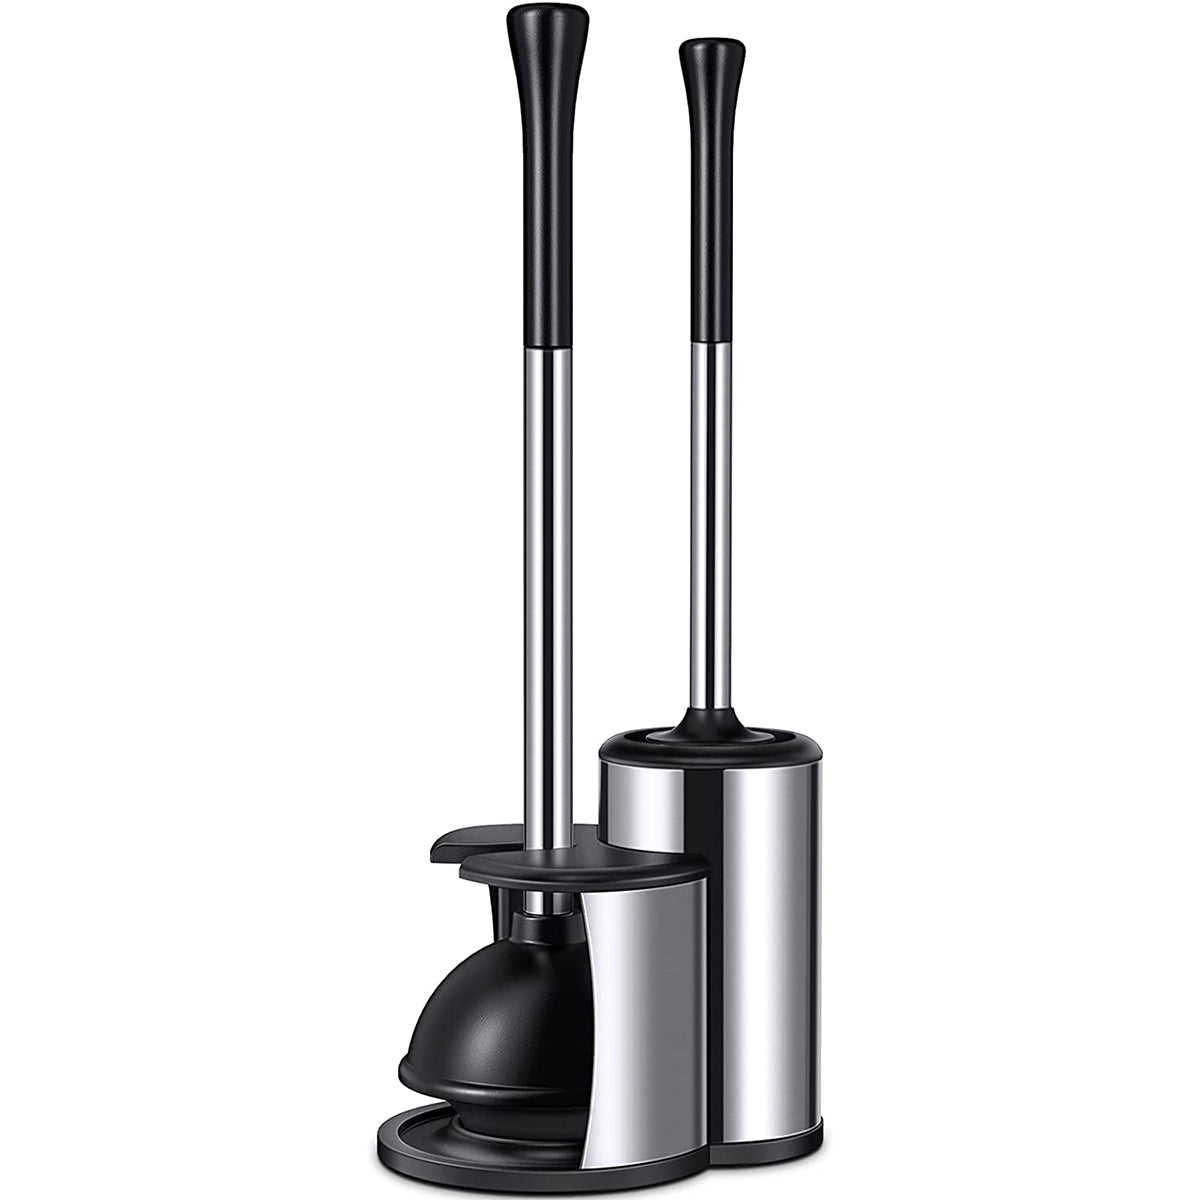 Plunger and Brush Set, 2 in 1Toilet Plunger and Brush Set, Black